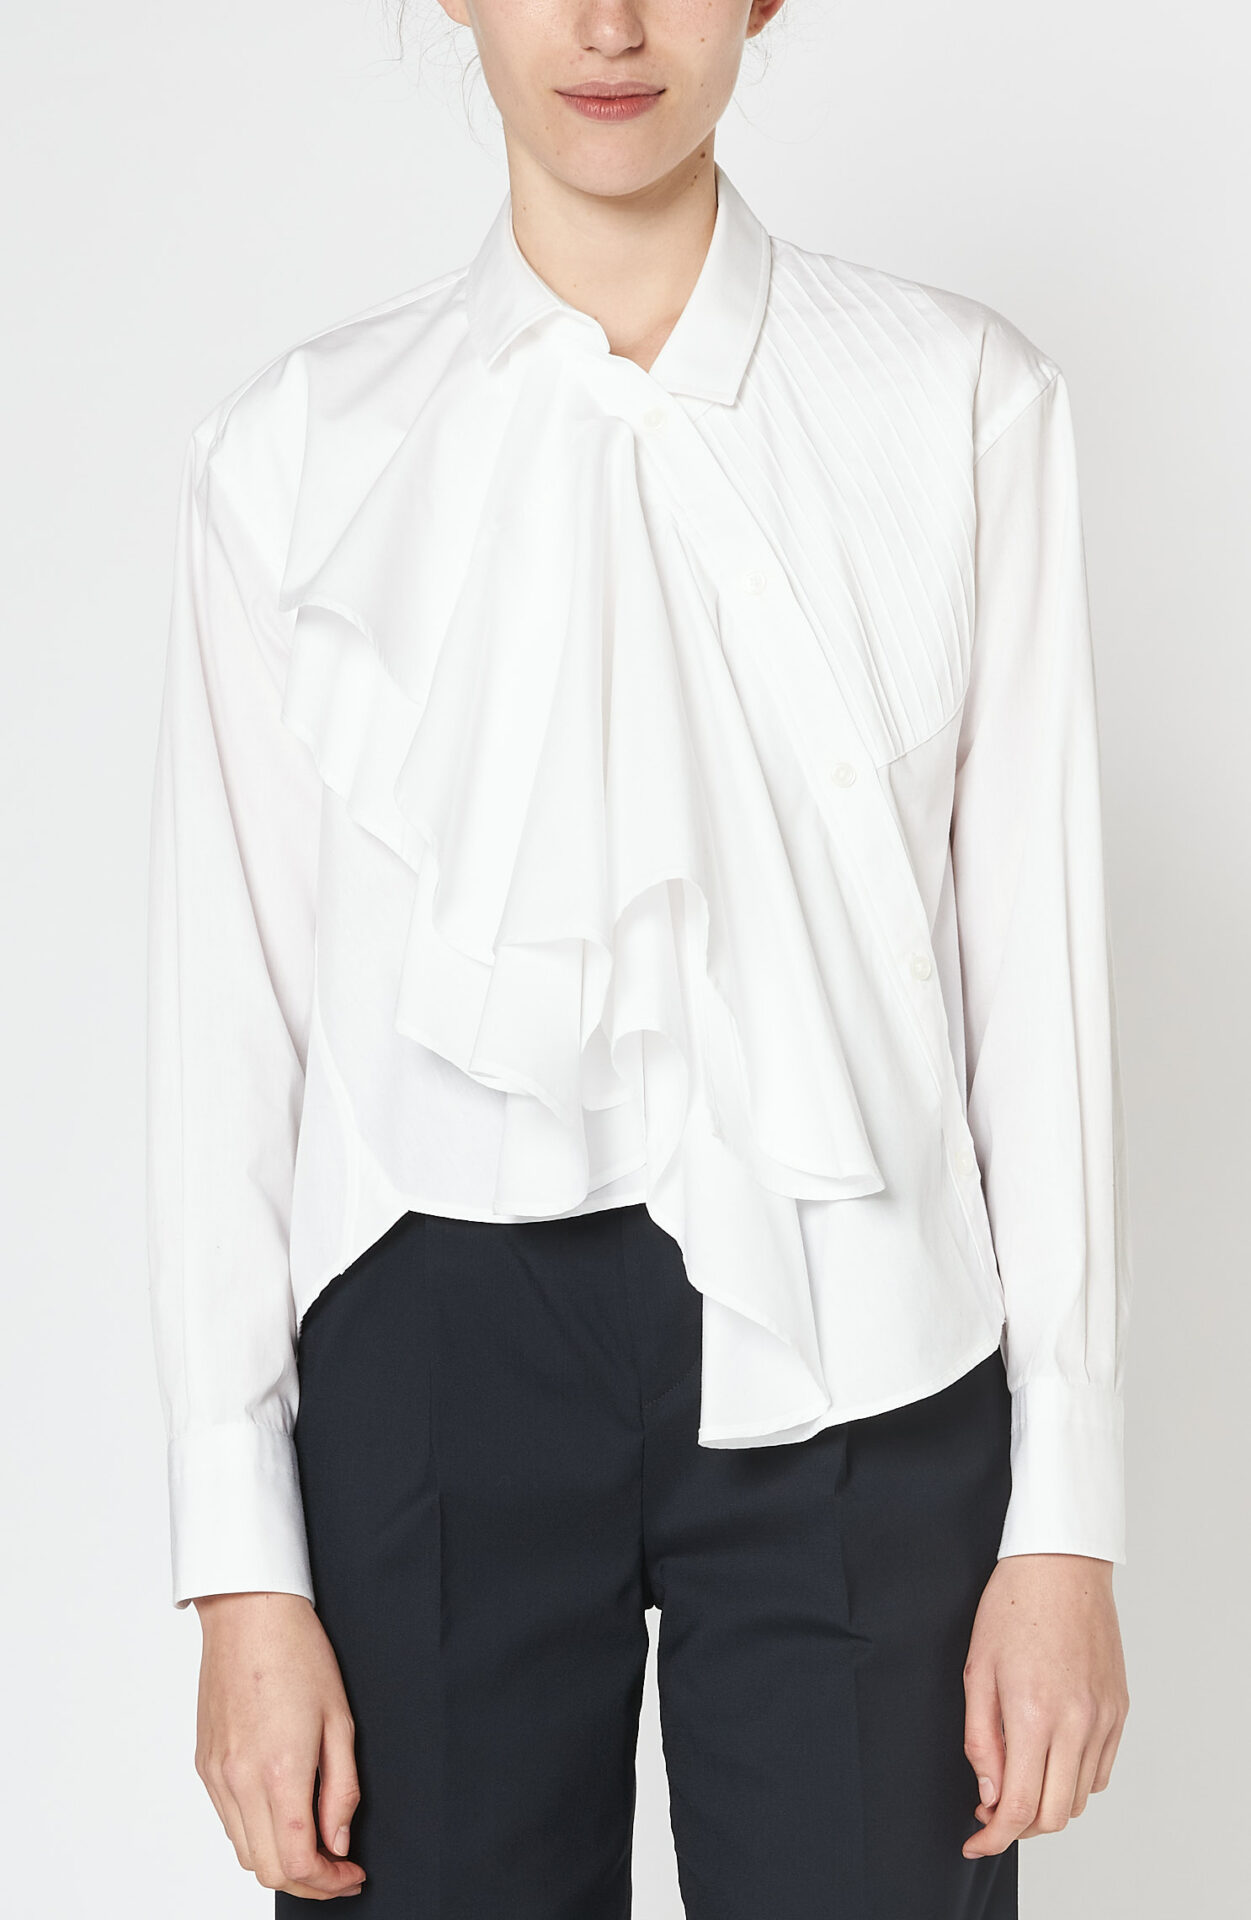 Kolor - White blouse with pleats and ruffles in cotton - Schwittenberg